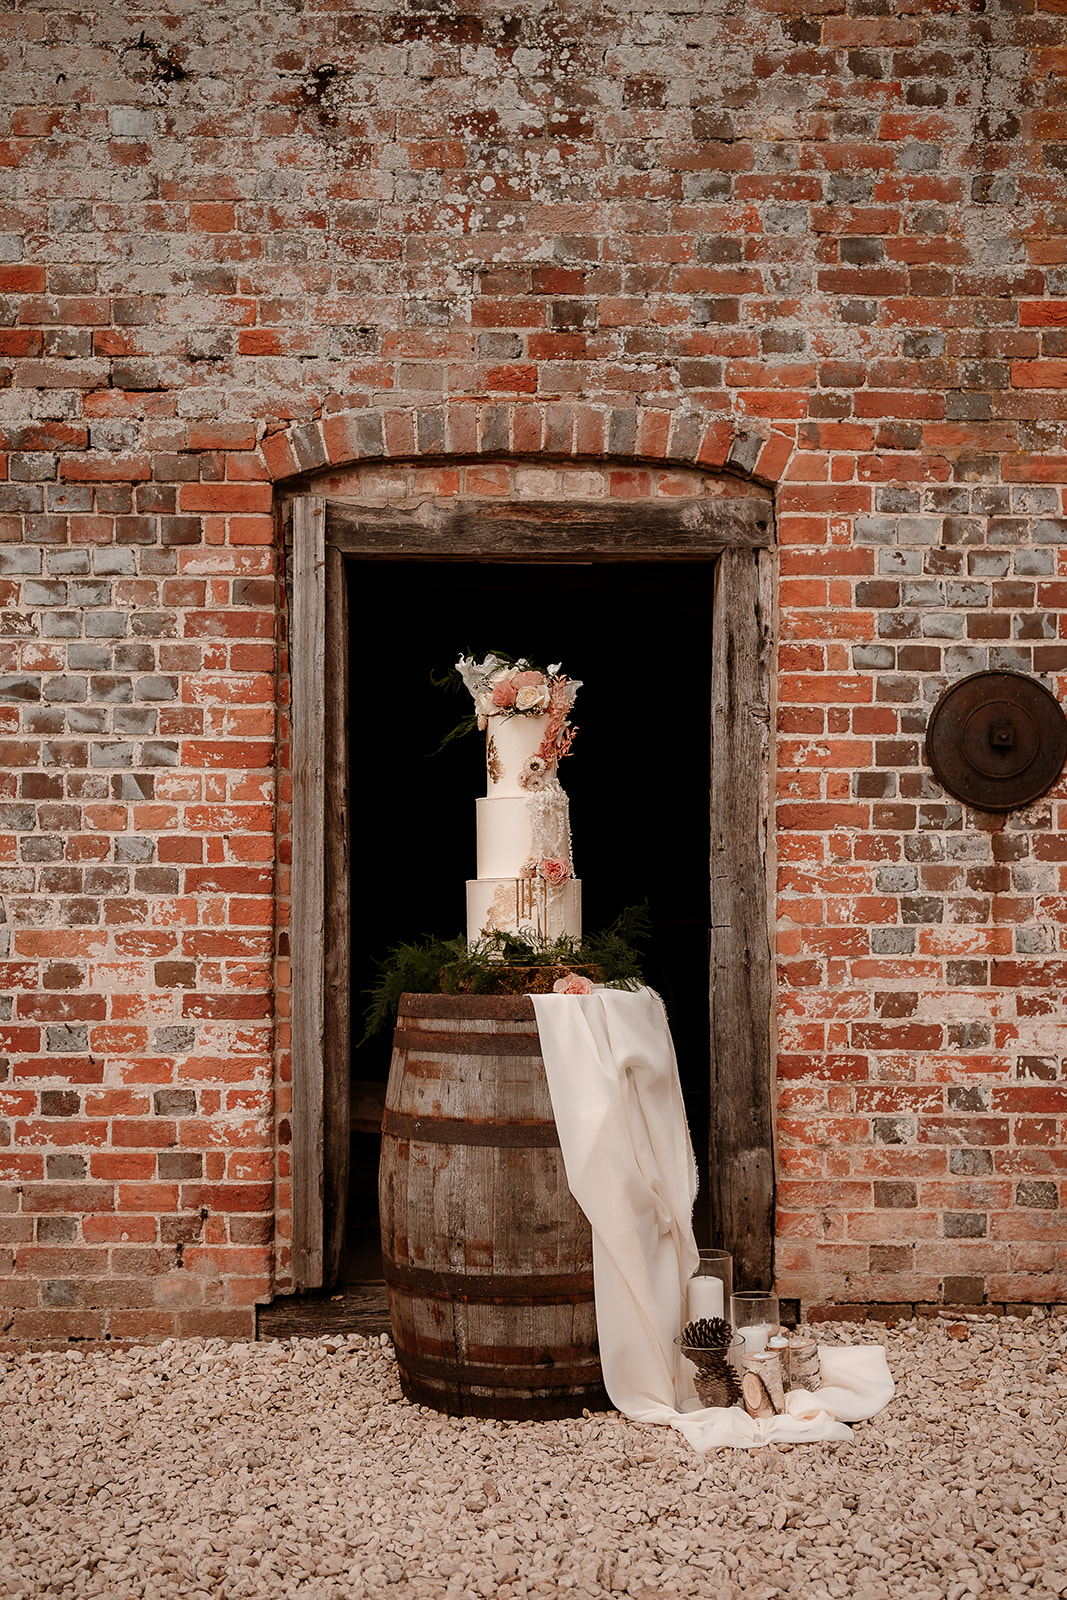 Stunning wedding cake sits on a wooden barrel framed by the door of Mapledurham water mill